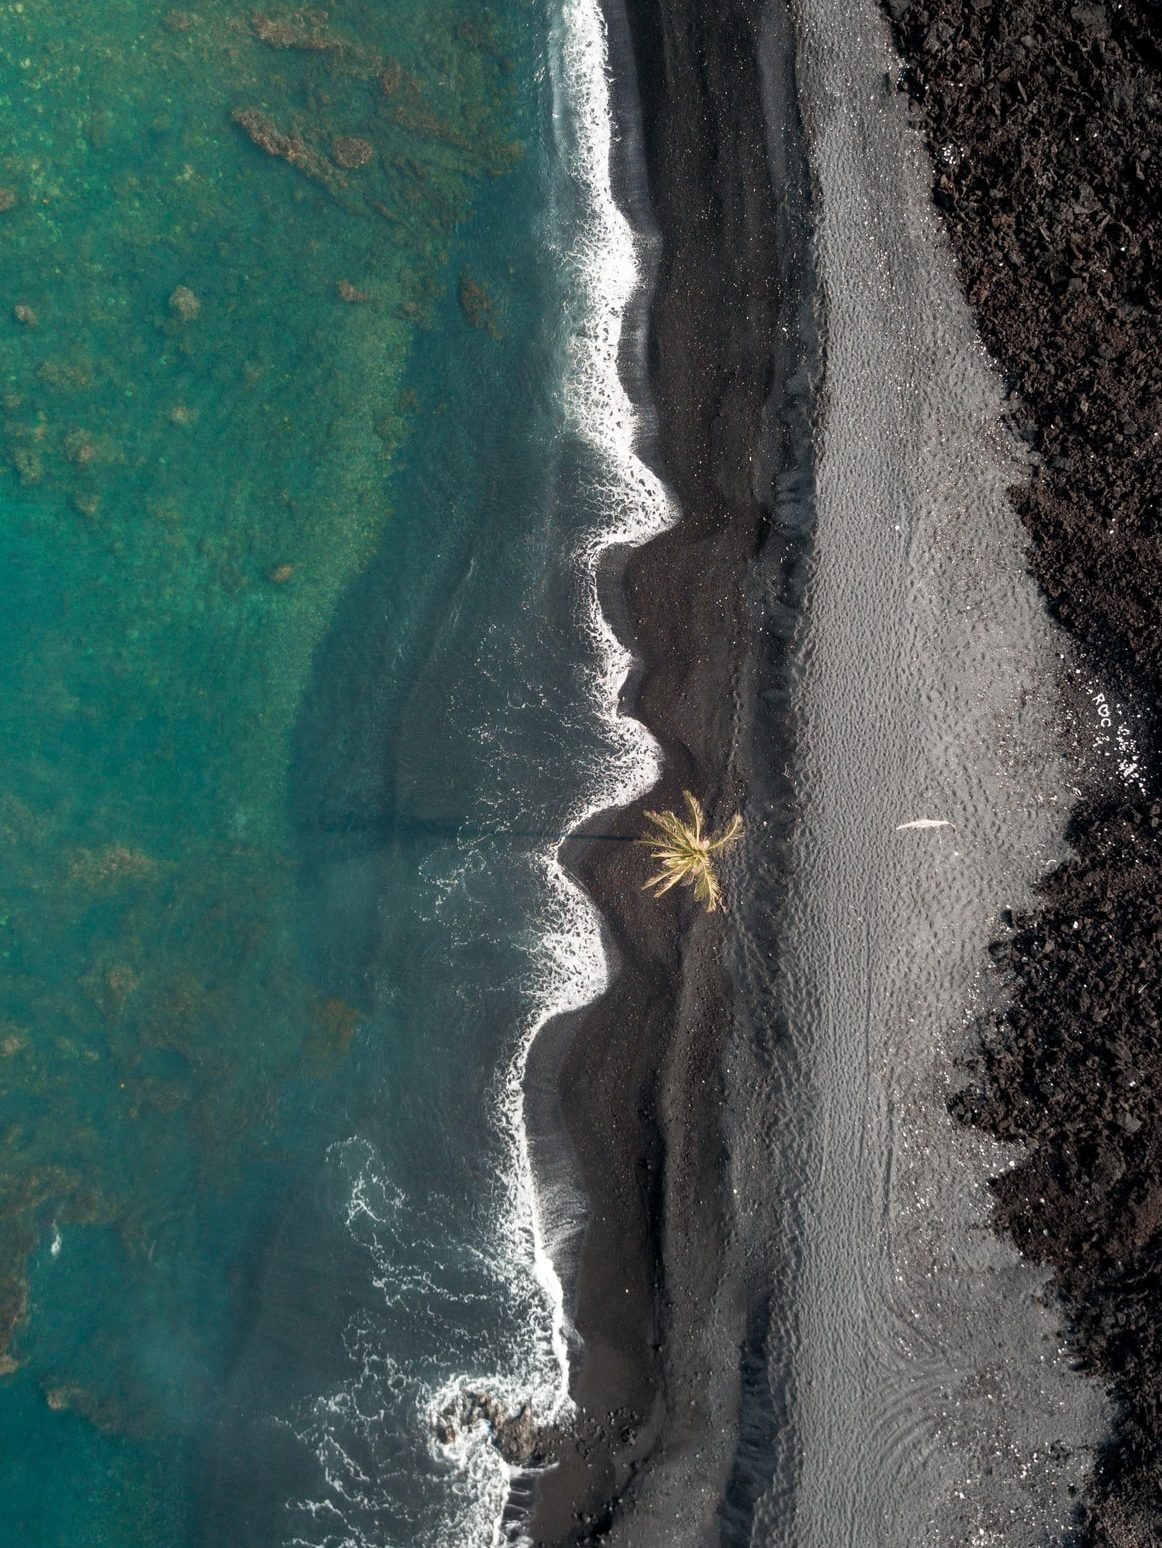 Top 5 Beautiful Black Sand Beaches in the World - Know where these black sands come from